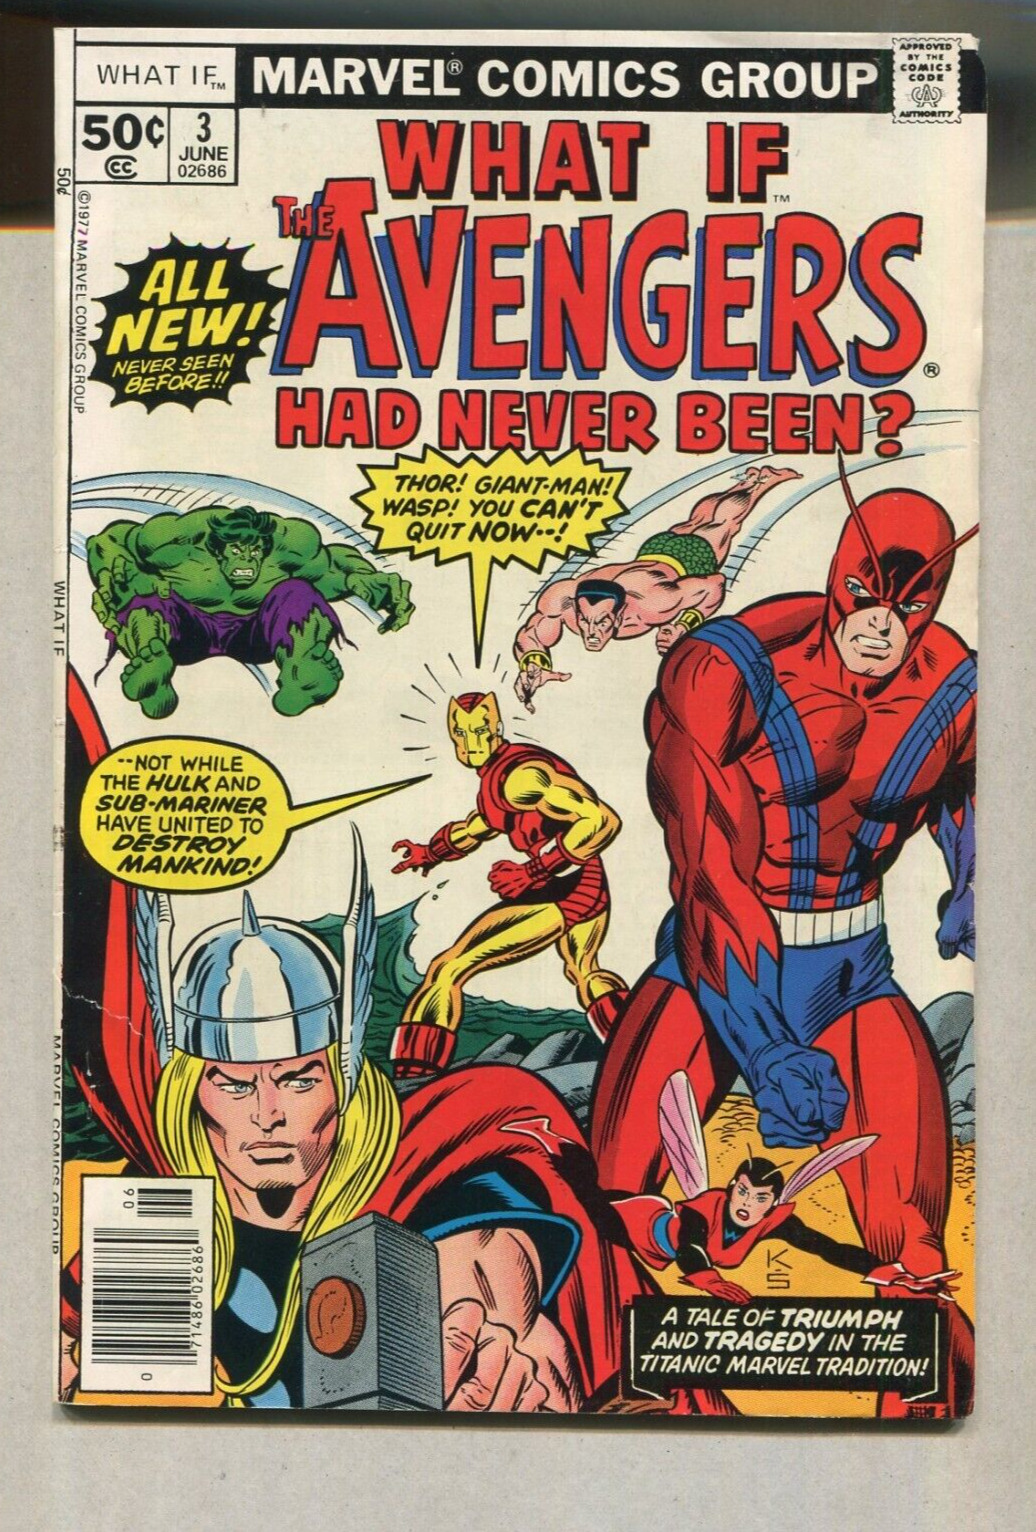 What If - The Avengers, Had Never Been #3 VF   Marvel  Comics   SA